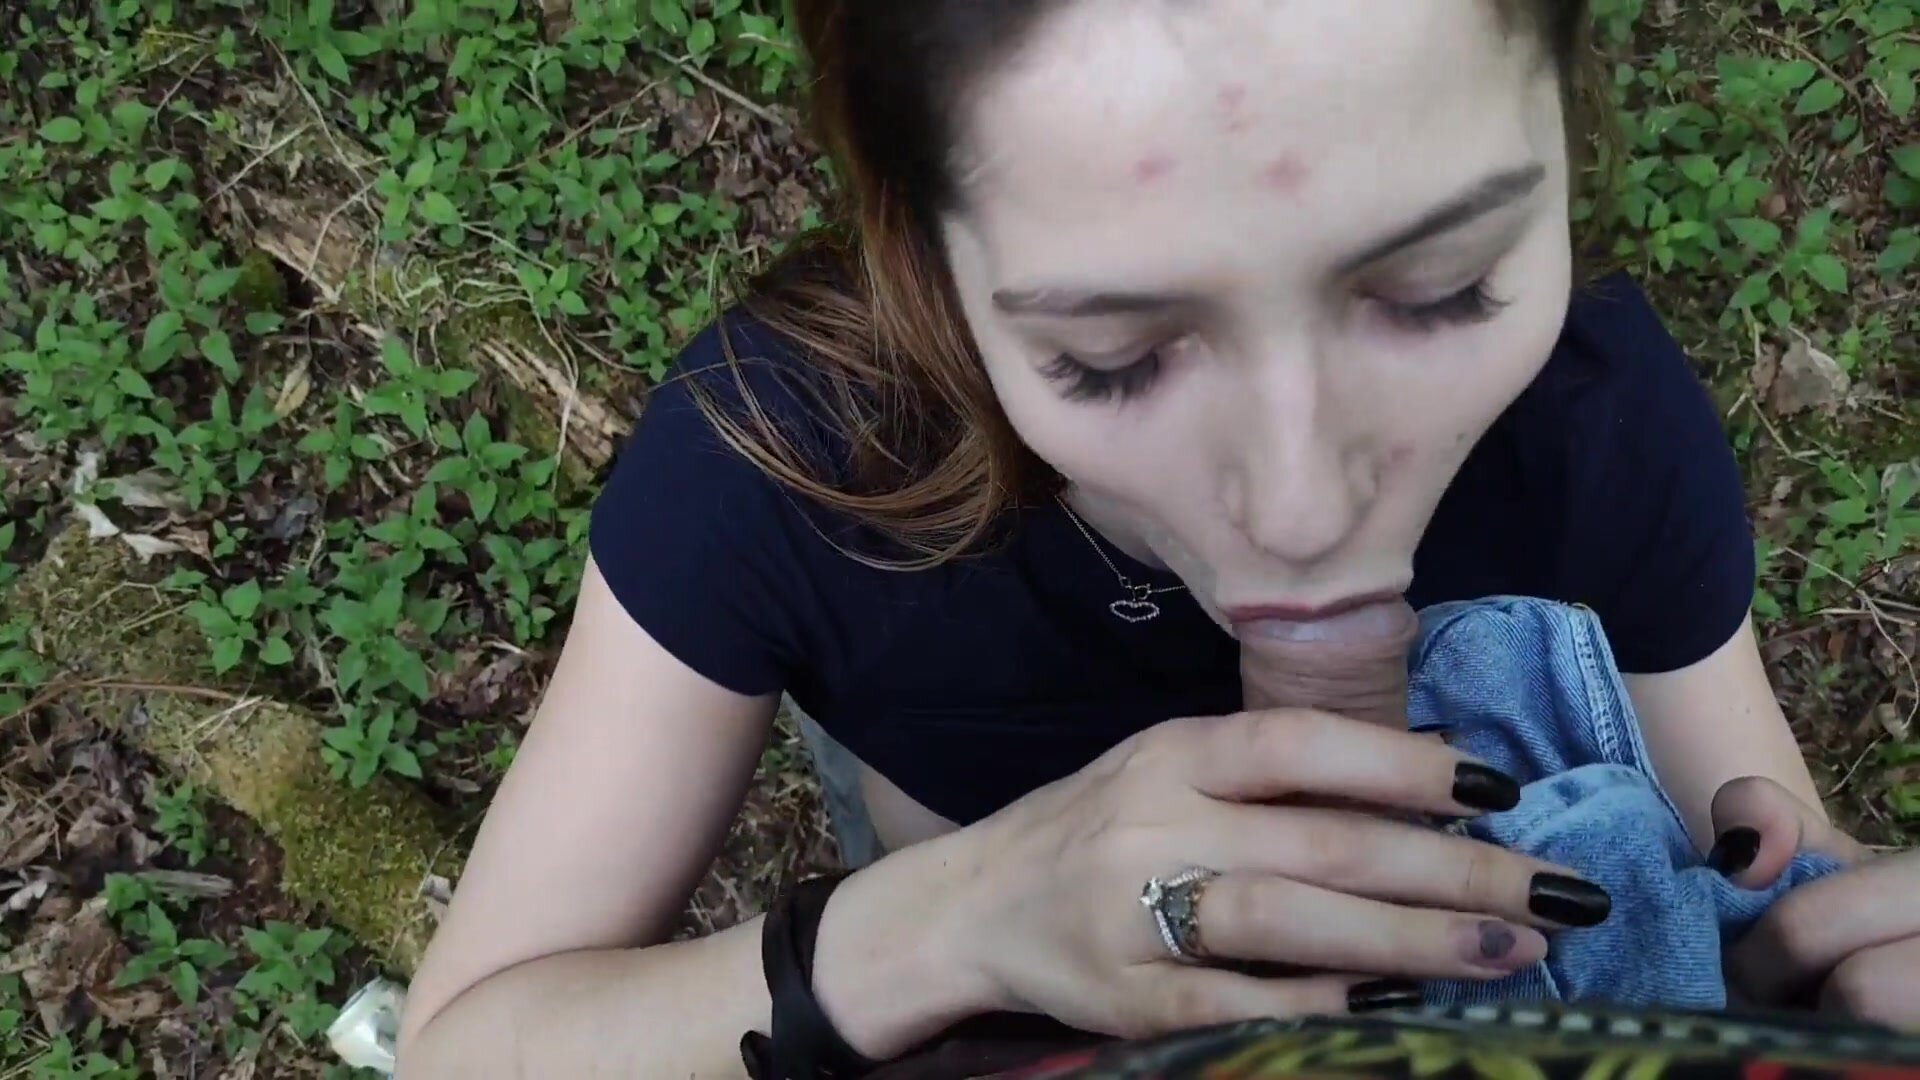 BabbyLittle - slobbery blowjob in the forest to an unknown guy